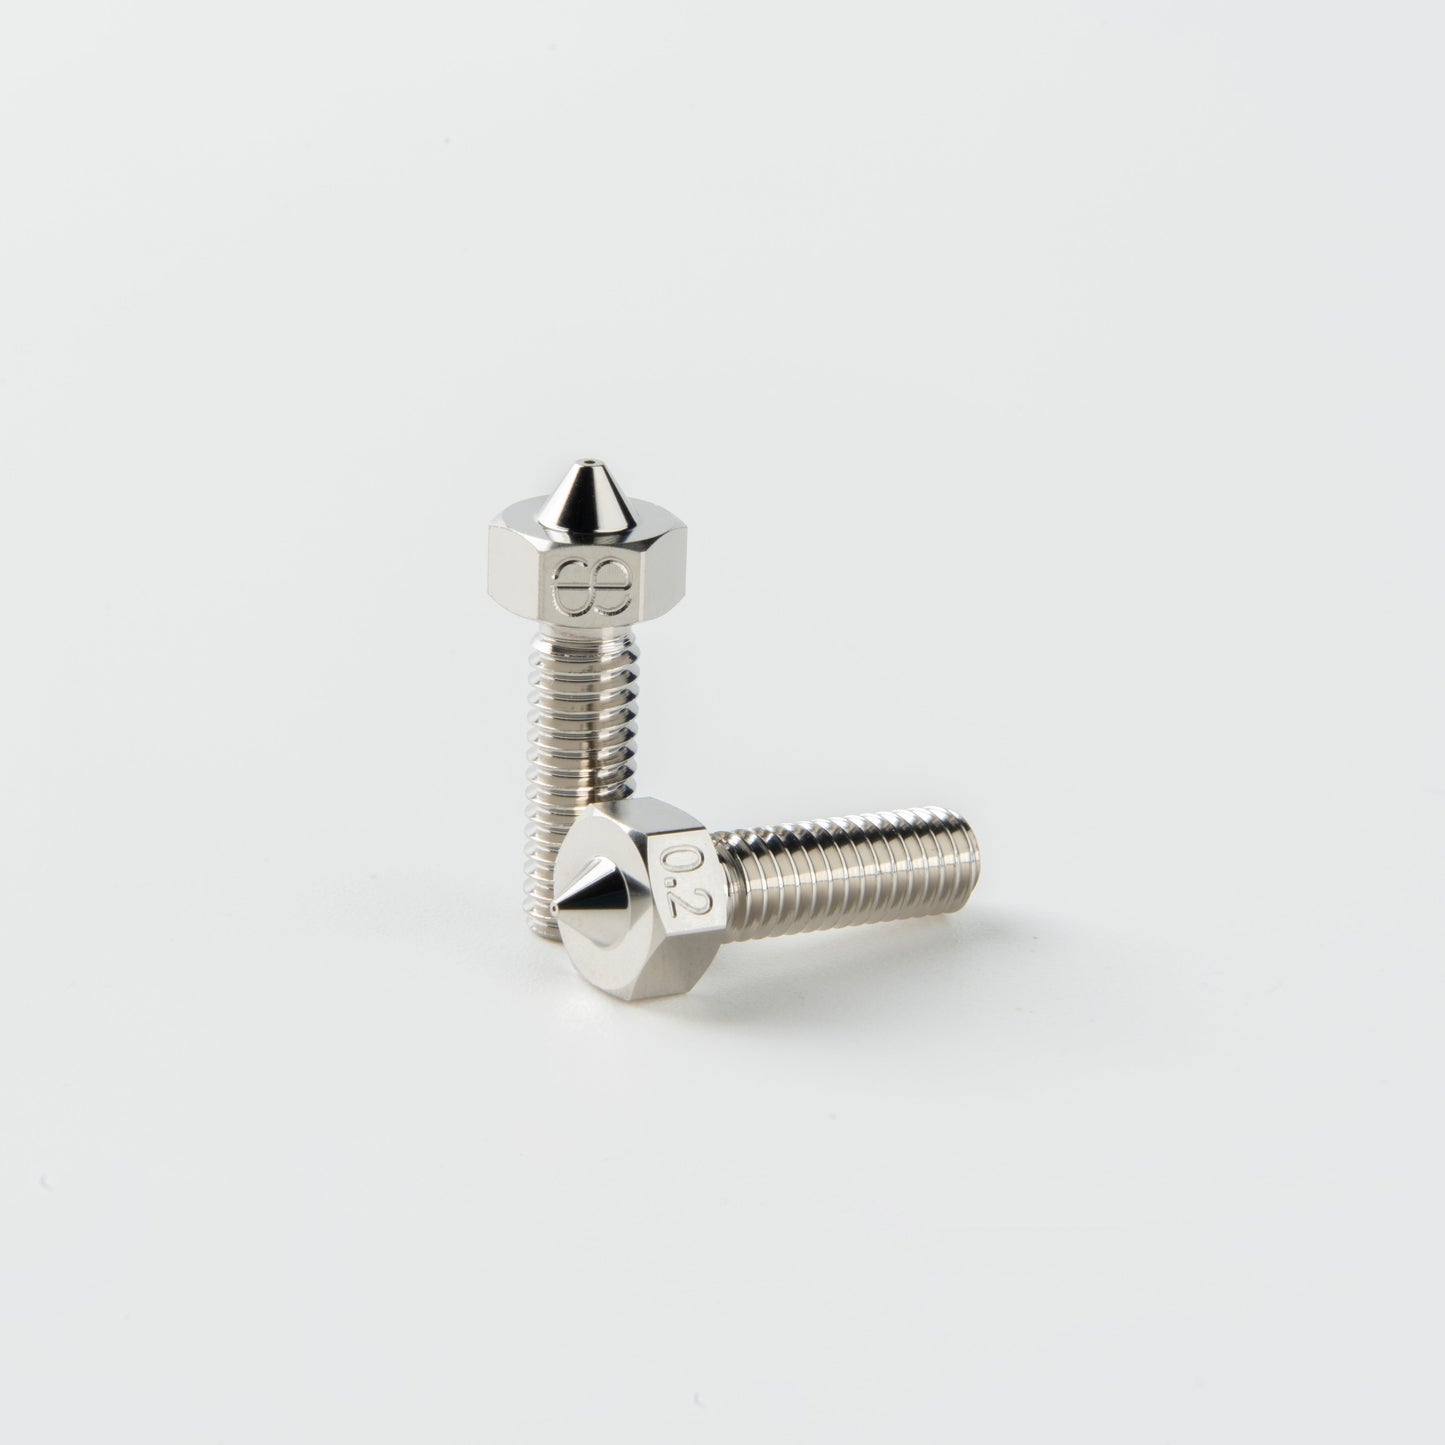 Phaetus/DropEffect XG Plated Copper Nozzle